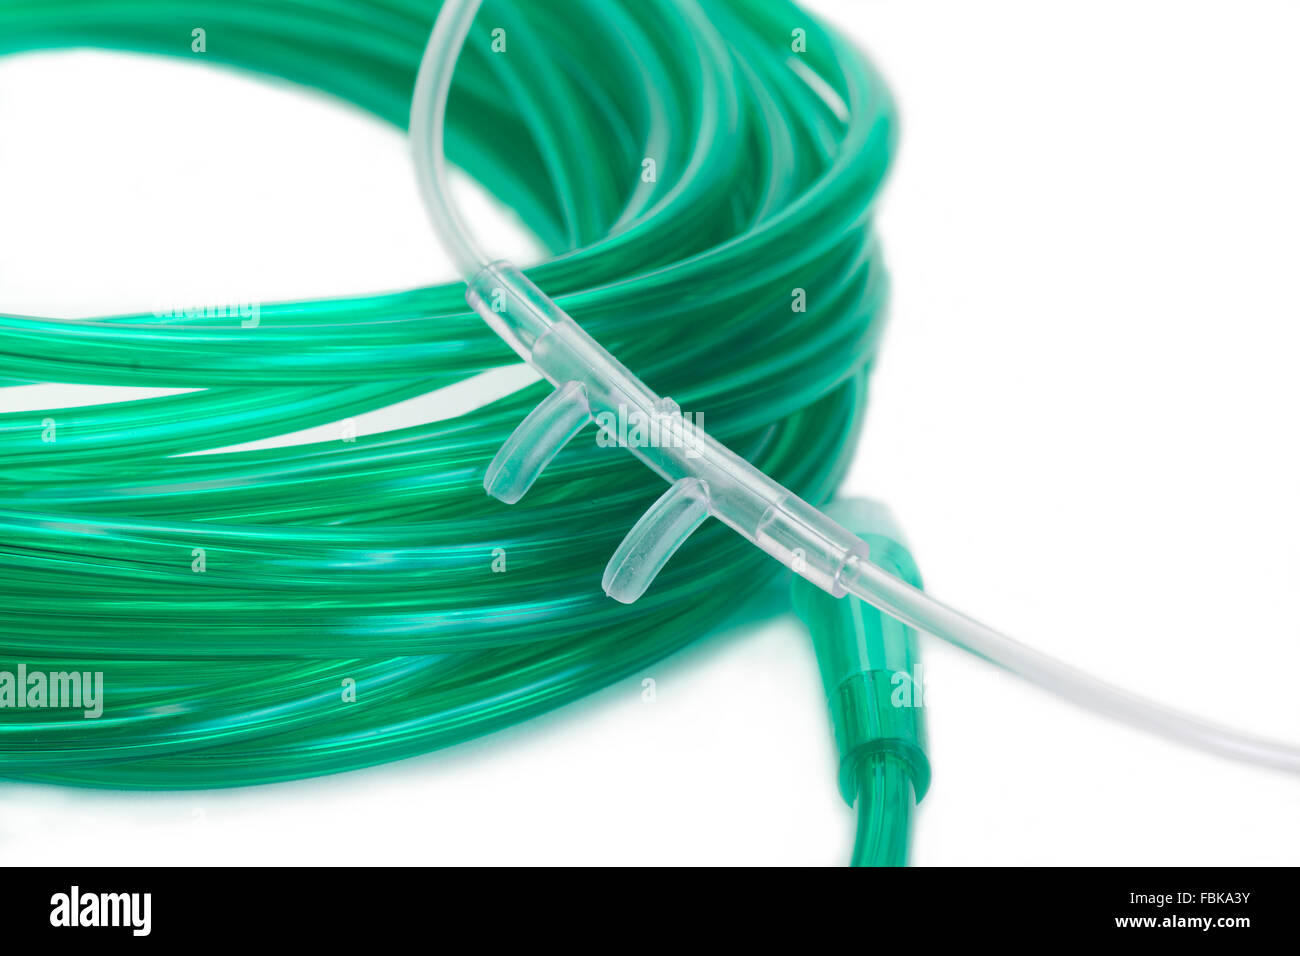 Nasal cannula with green pxygen tubing. Stock Photo